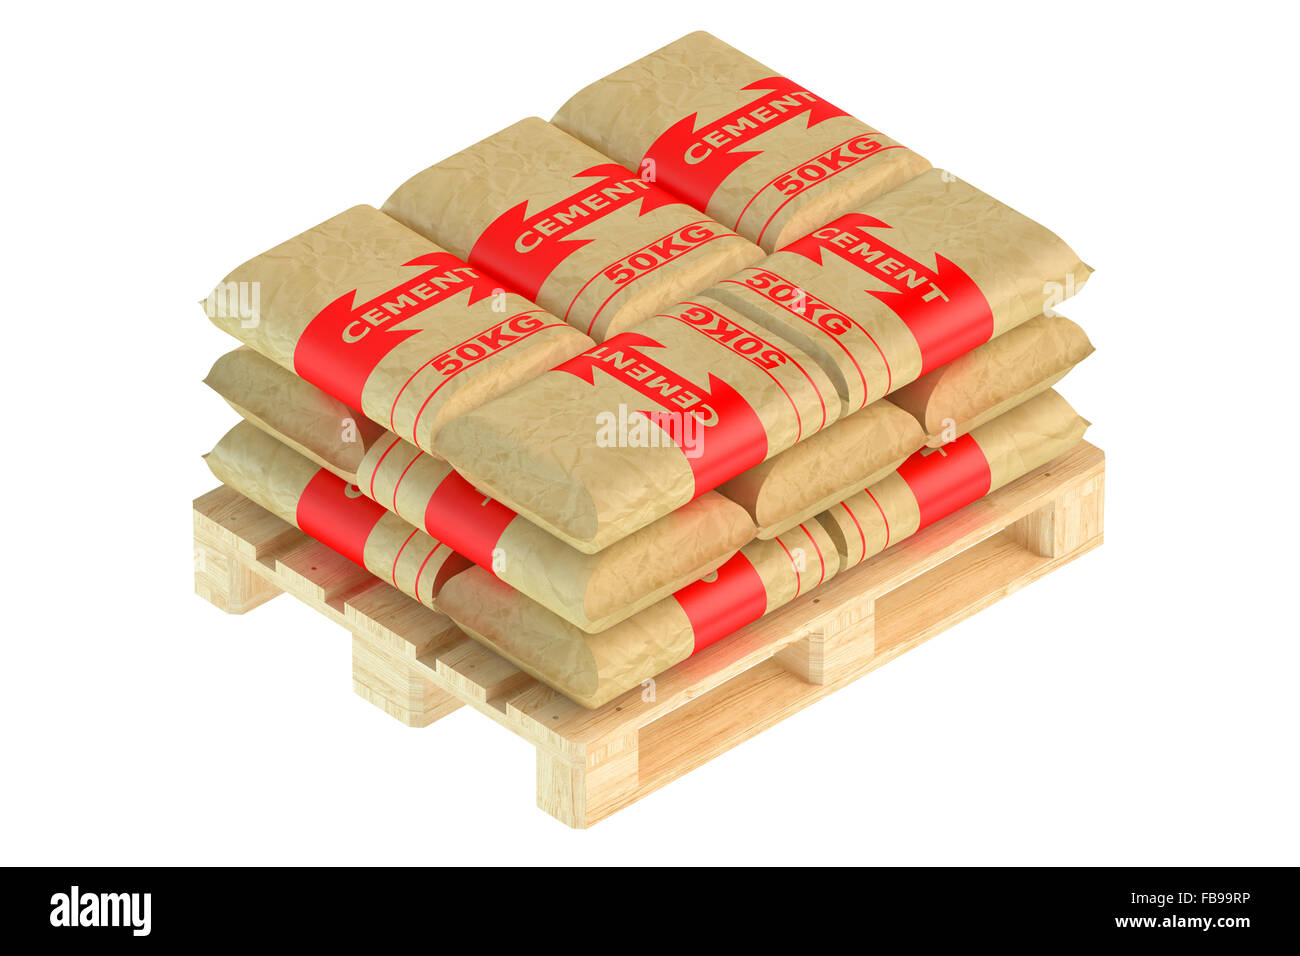 Cement In Bags 3d Rendering Isolated On White Background Stock